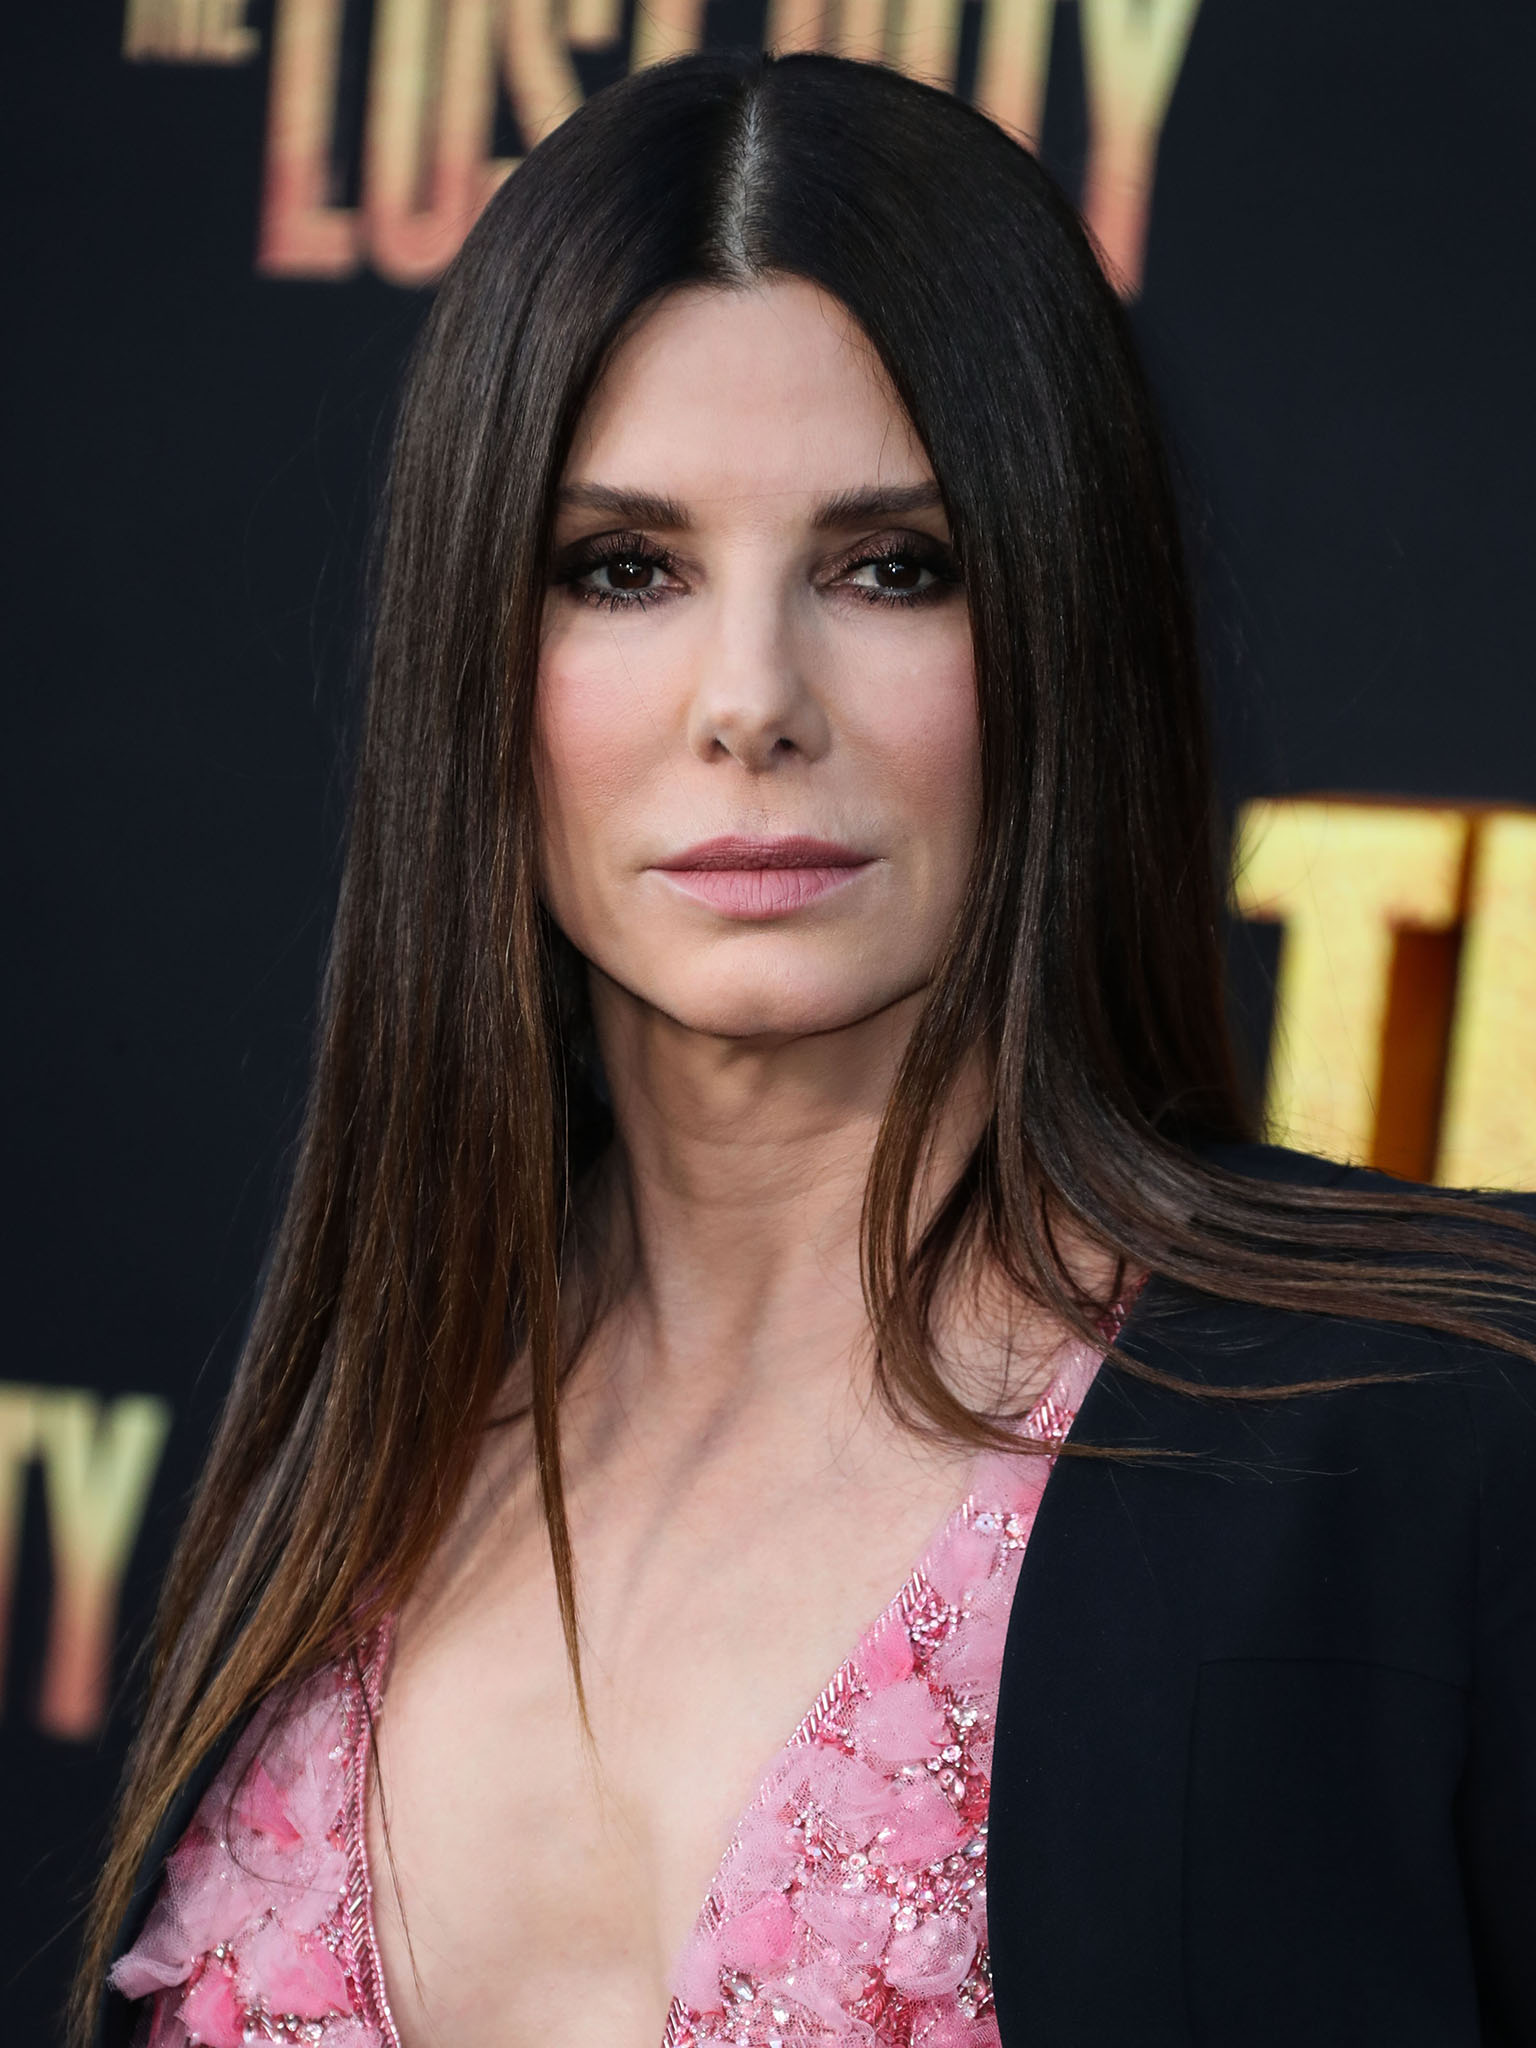 Sandra Bullock flashes her cleavage and wears sultry smokey eyeshadow and straightened locks